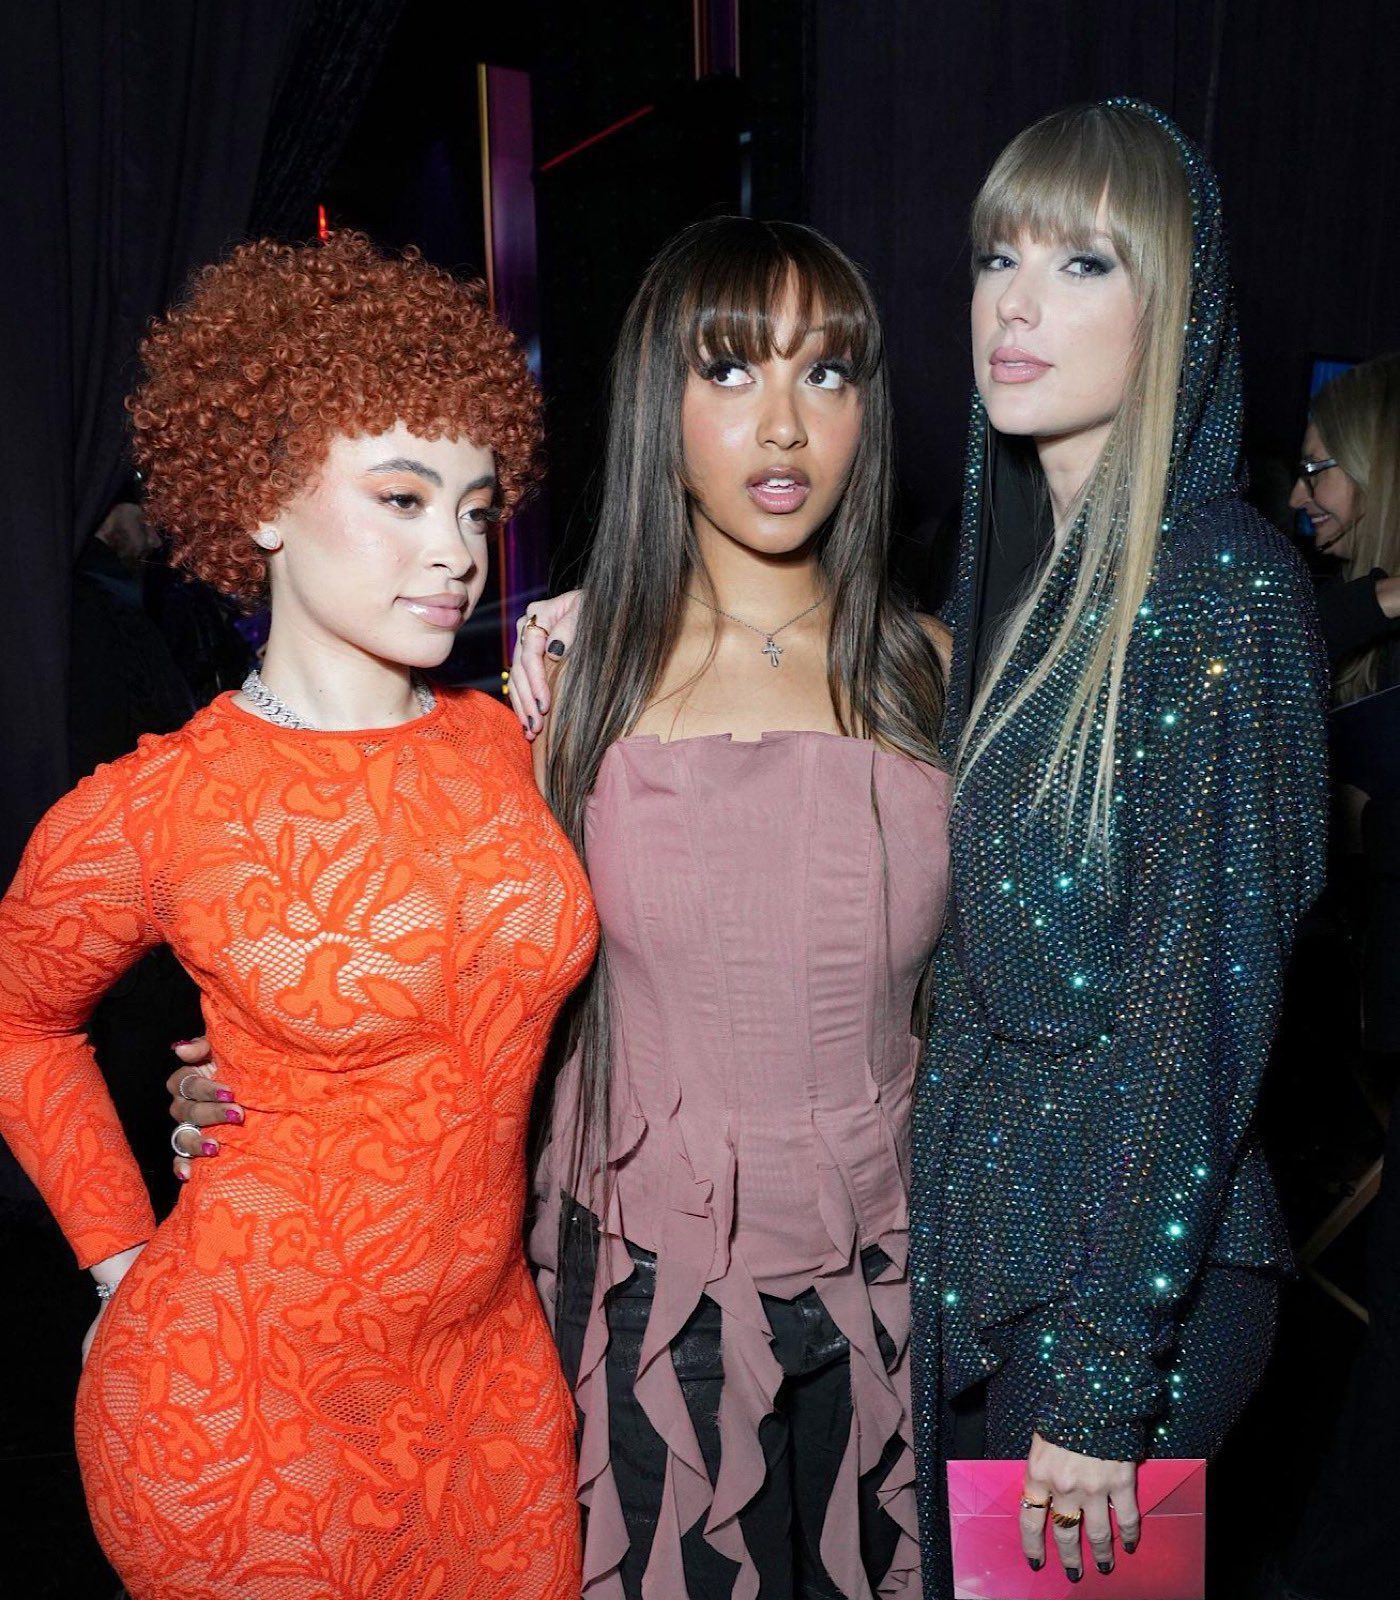 Taylor Swift poses with her friends at the 2020 AMAs. - Ice Spice, Taylor Swift